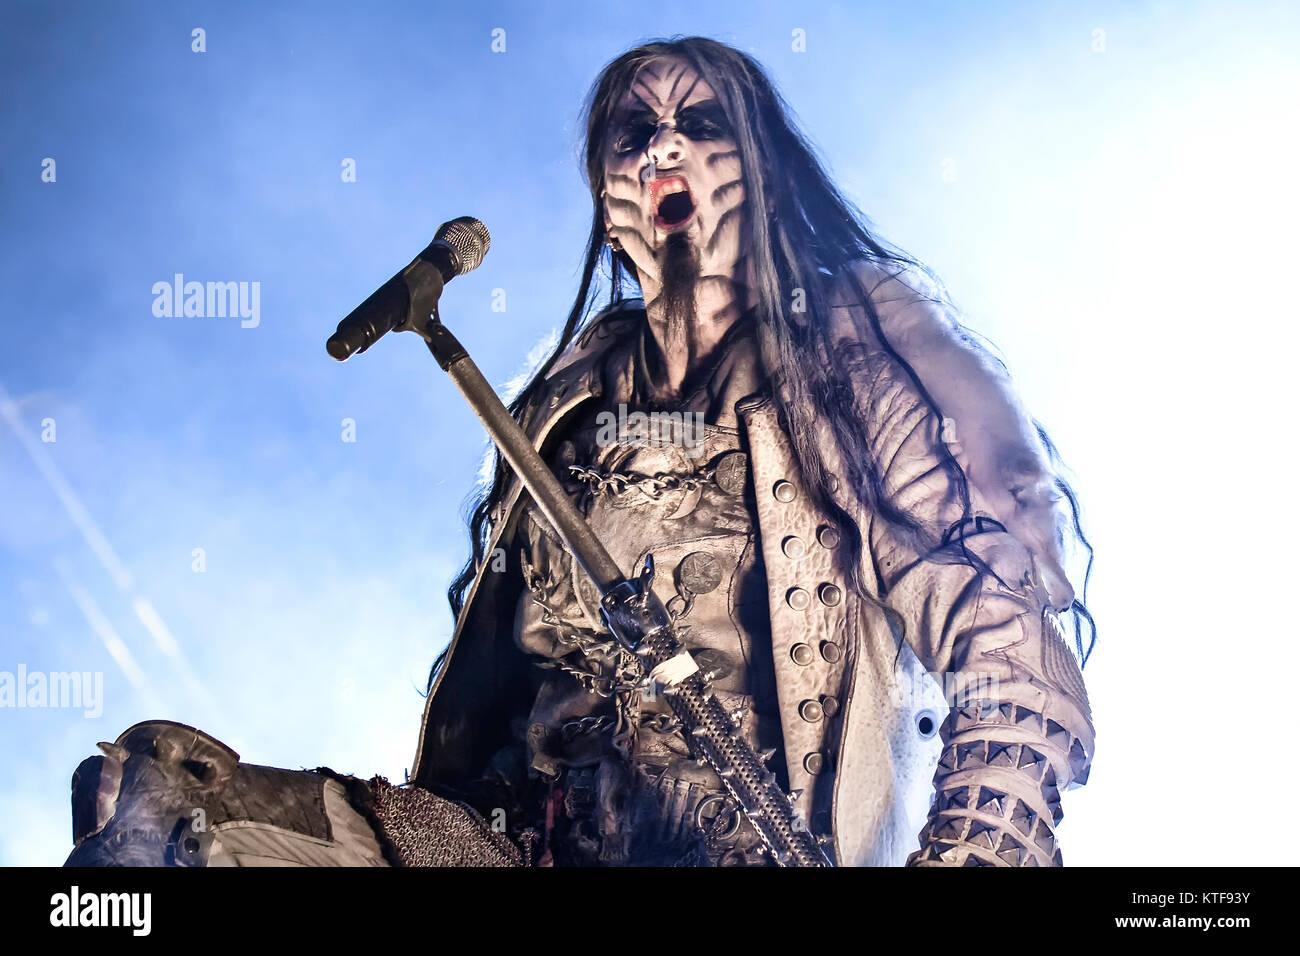 Cochin MetalStorm - Shagrath (Dimmu Borgir) Birth Name: Stian Tomt Thoresen  Co-founder of Dimmu Borgir, Shagrath is a multi-instrumentalist who has  filled every role in the band at one time, and is